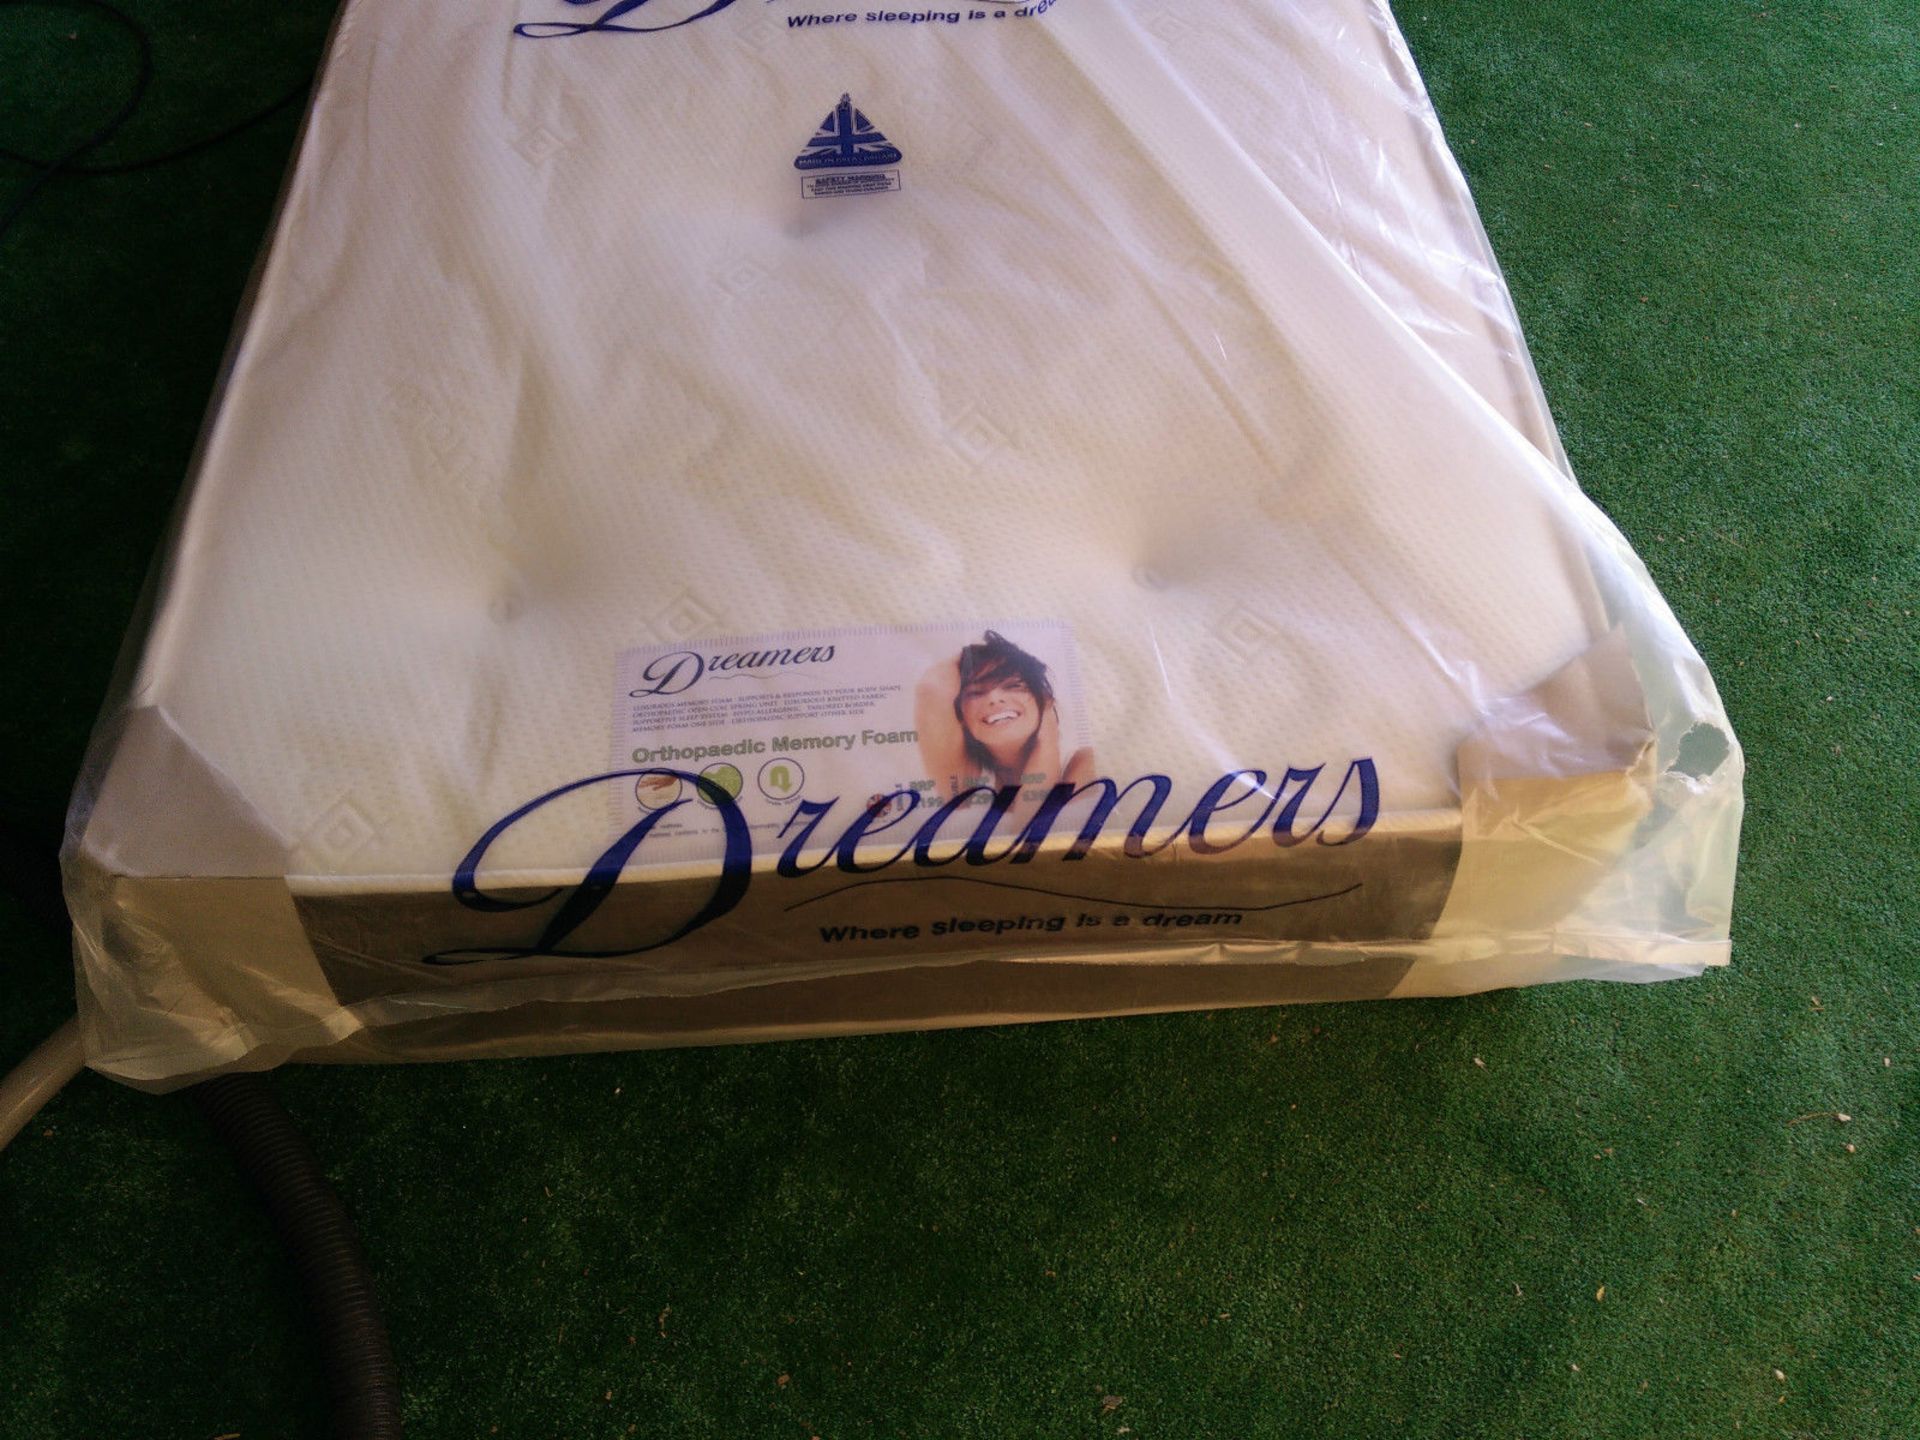 V Brand New Double Size Orthopedic Memory Mattress / Dreamers - Orthopaedic Memory Foam Double Bed / - Image 2 of 5